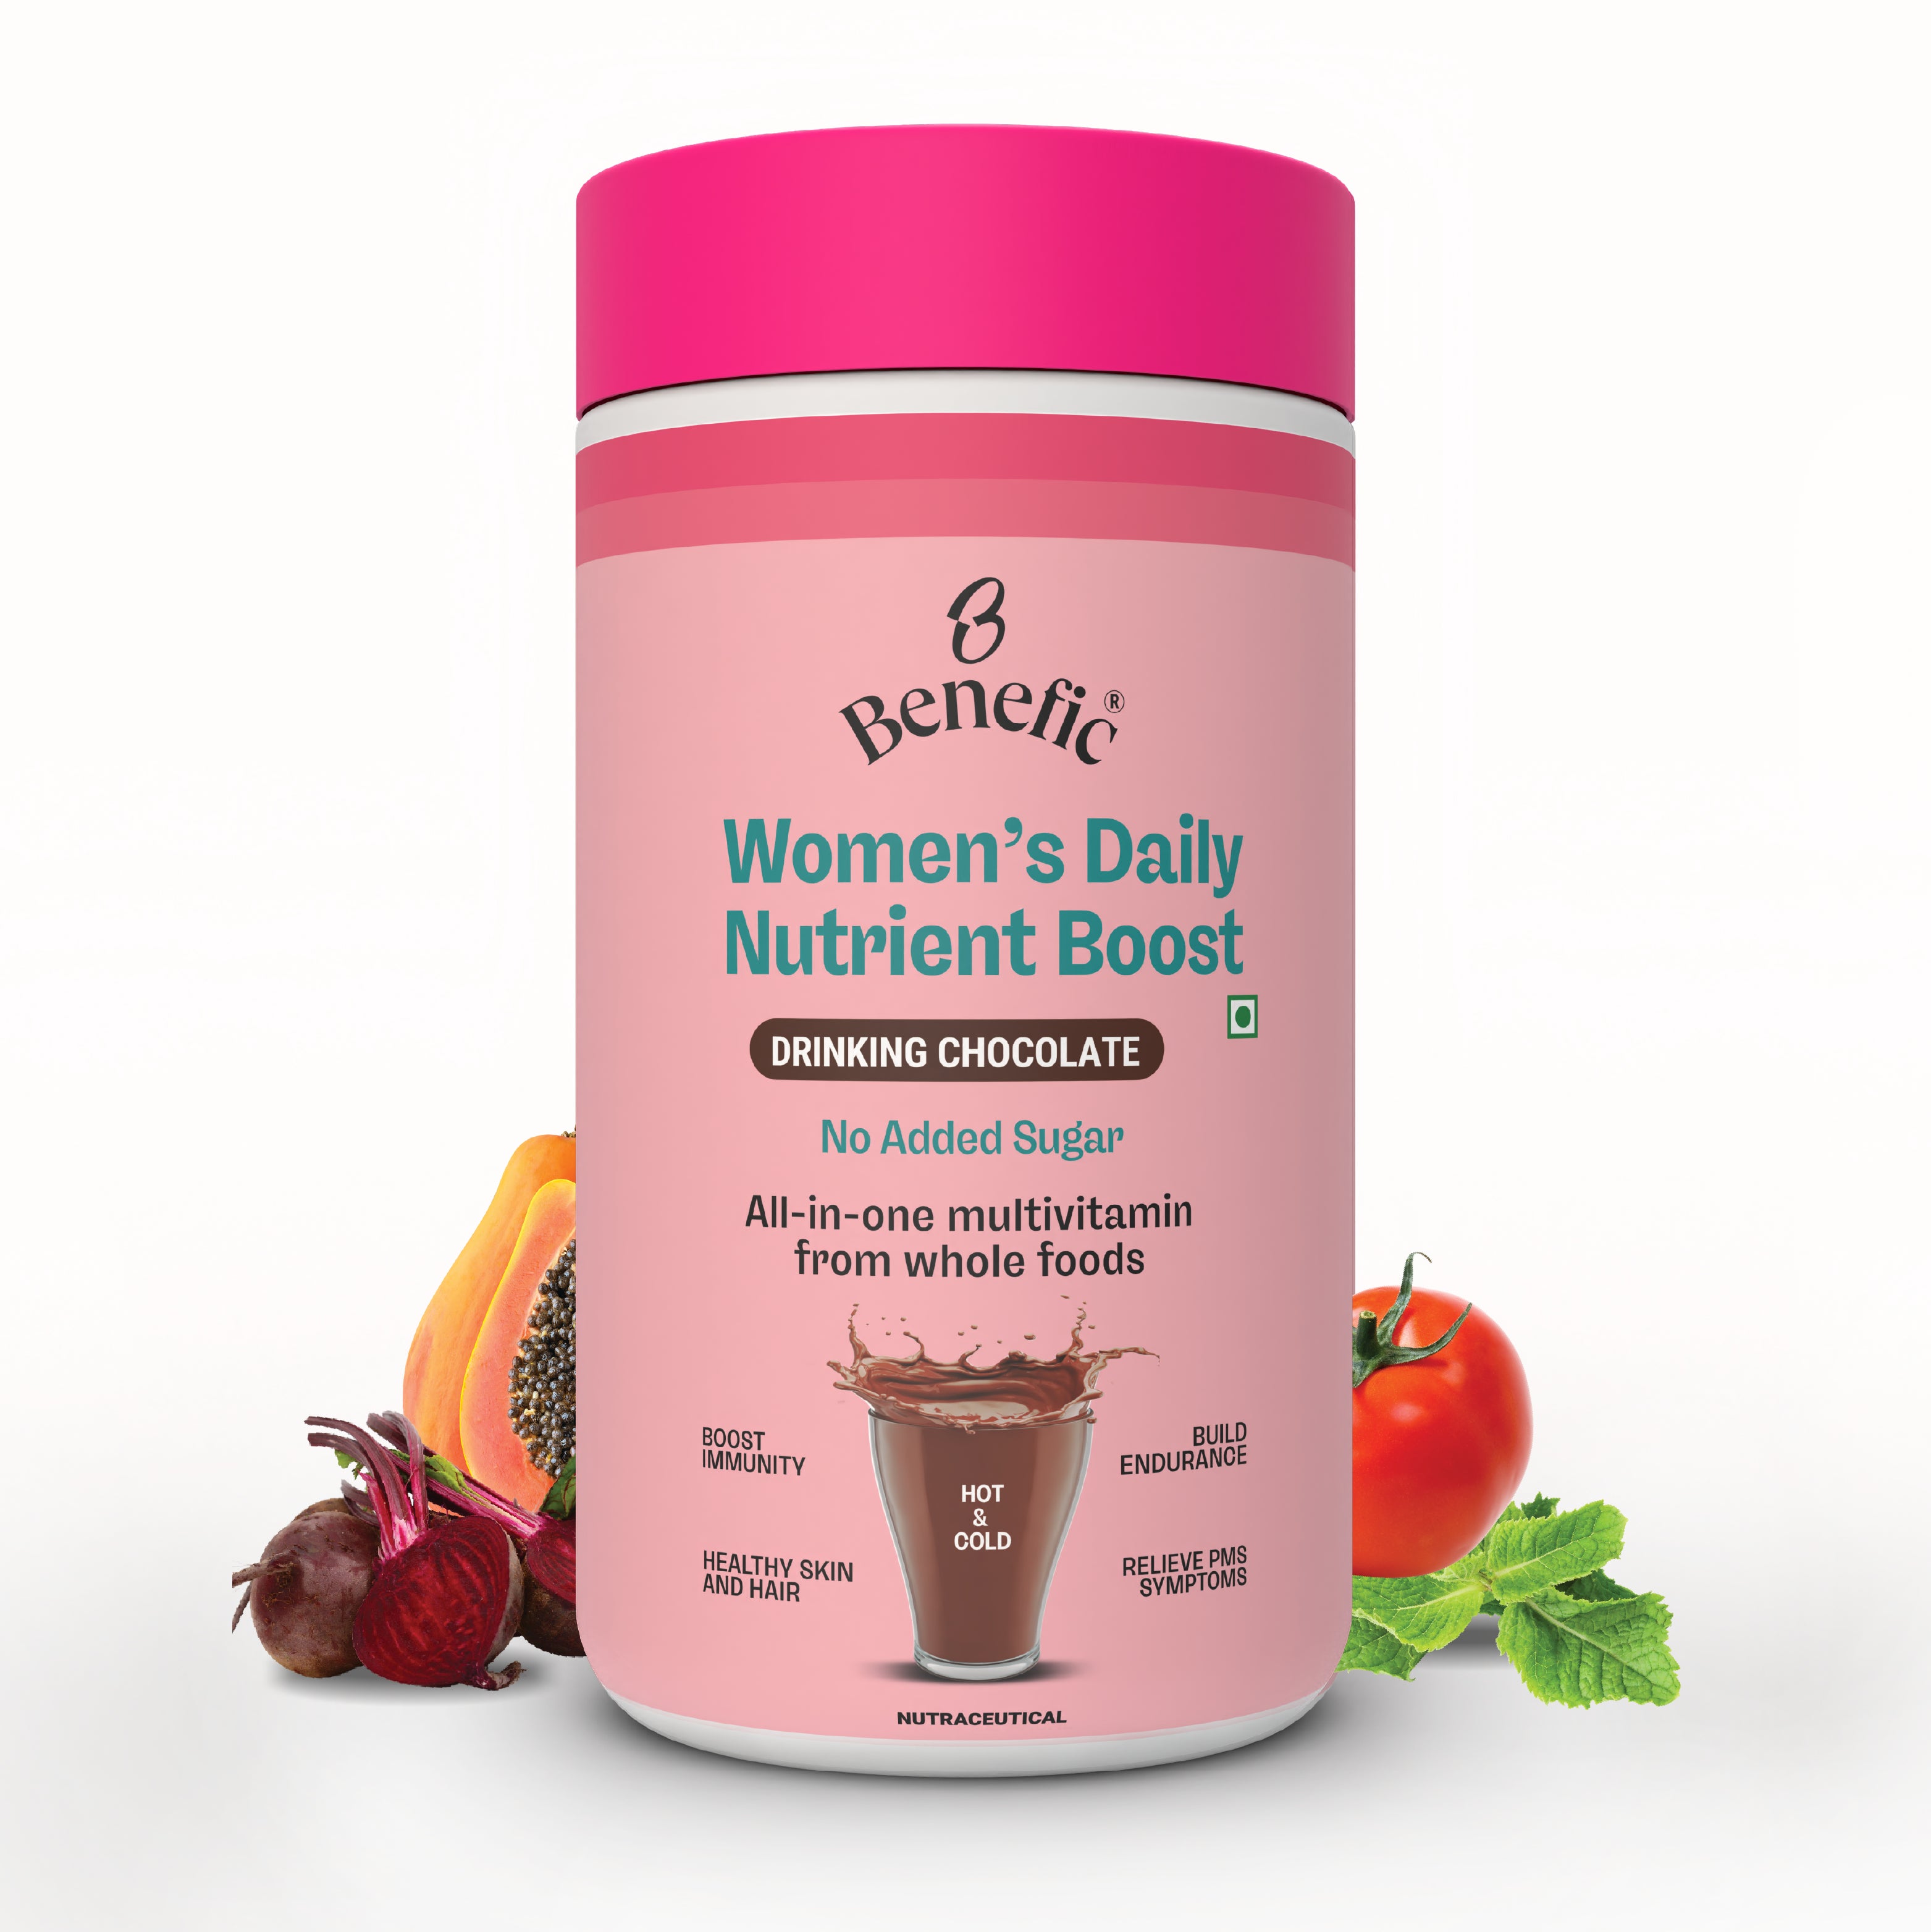 Women's Daily Nutrient Boost Drinking Chocolate